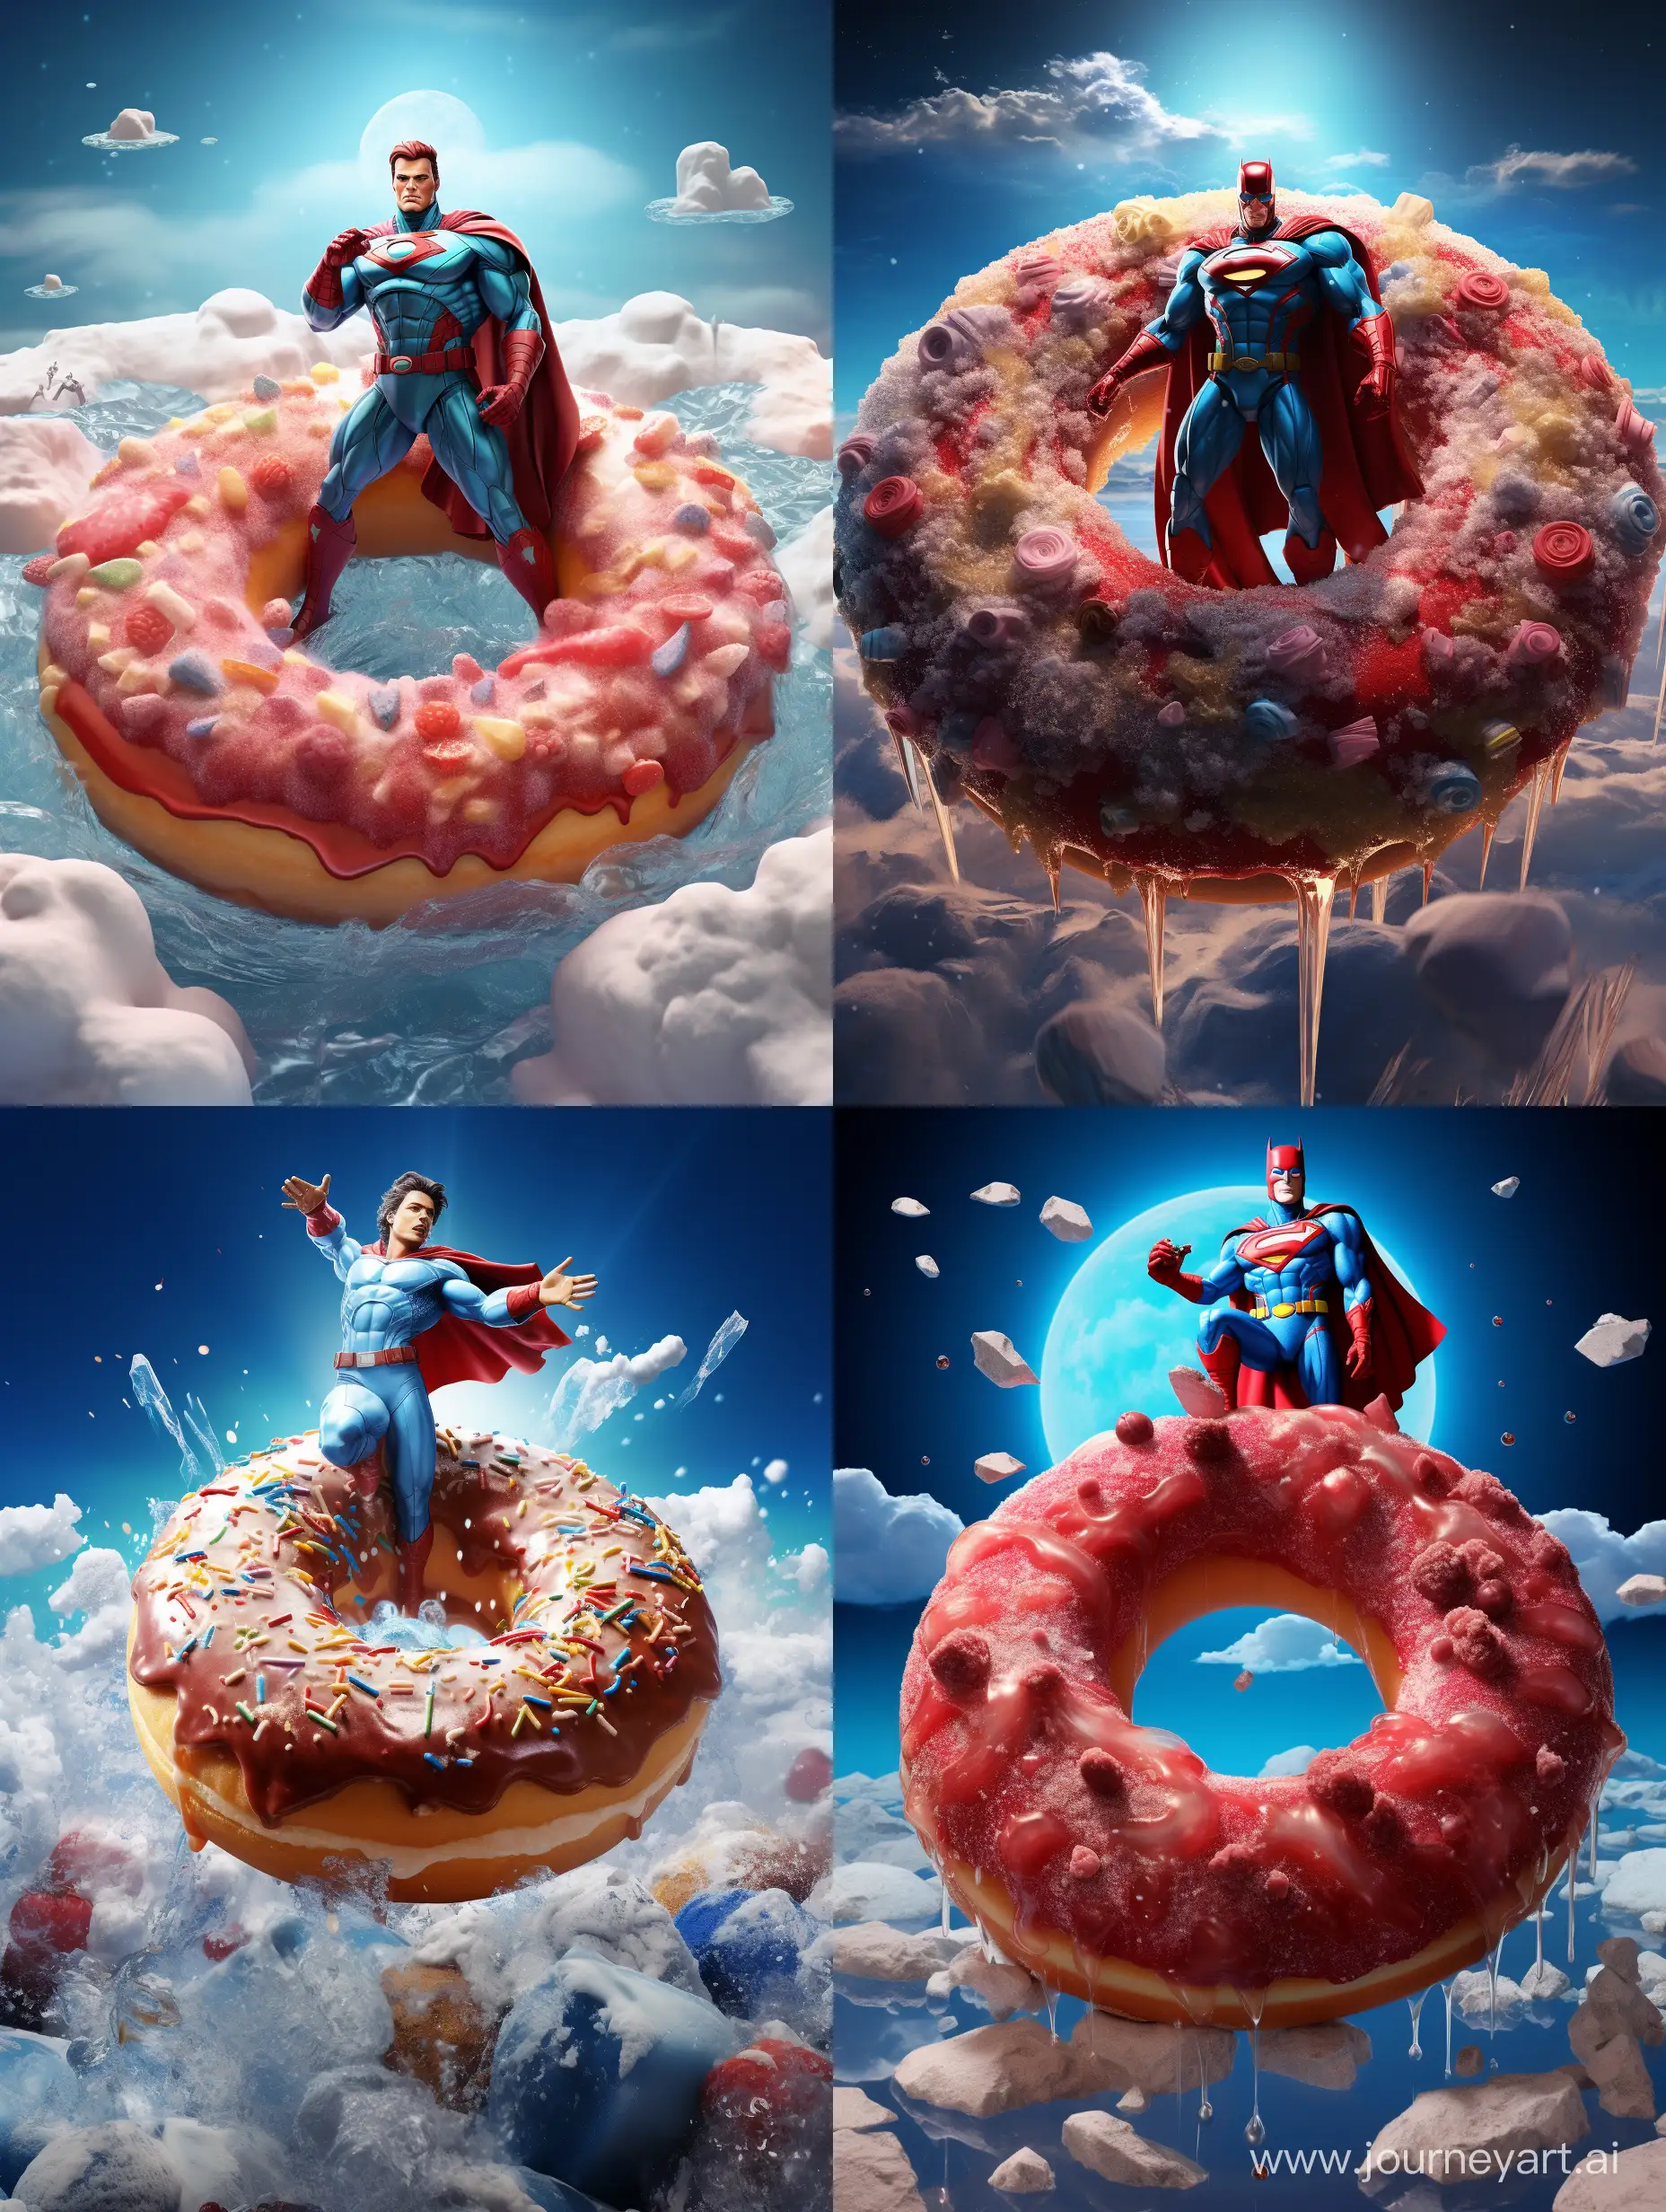 The image features a large donut with frosting and sprinkles, placed on top of ice cubes. The donut is decorated like Superman, making it an interesting and unique dessert. It appears to be the centerpiece of the scene, capturing attention due to its creative design.